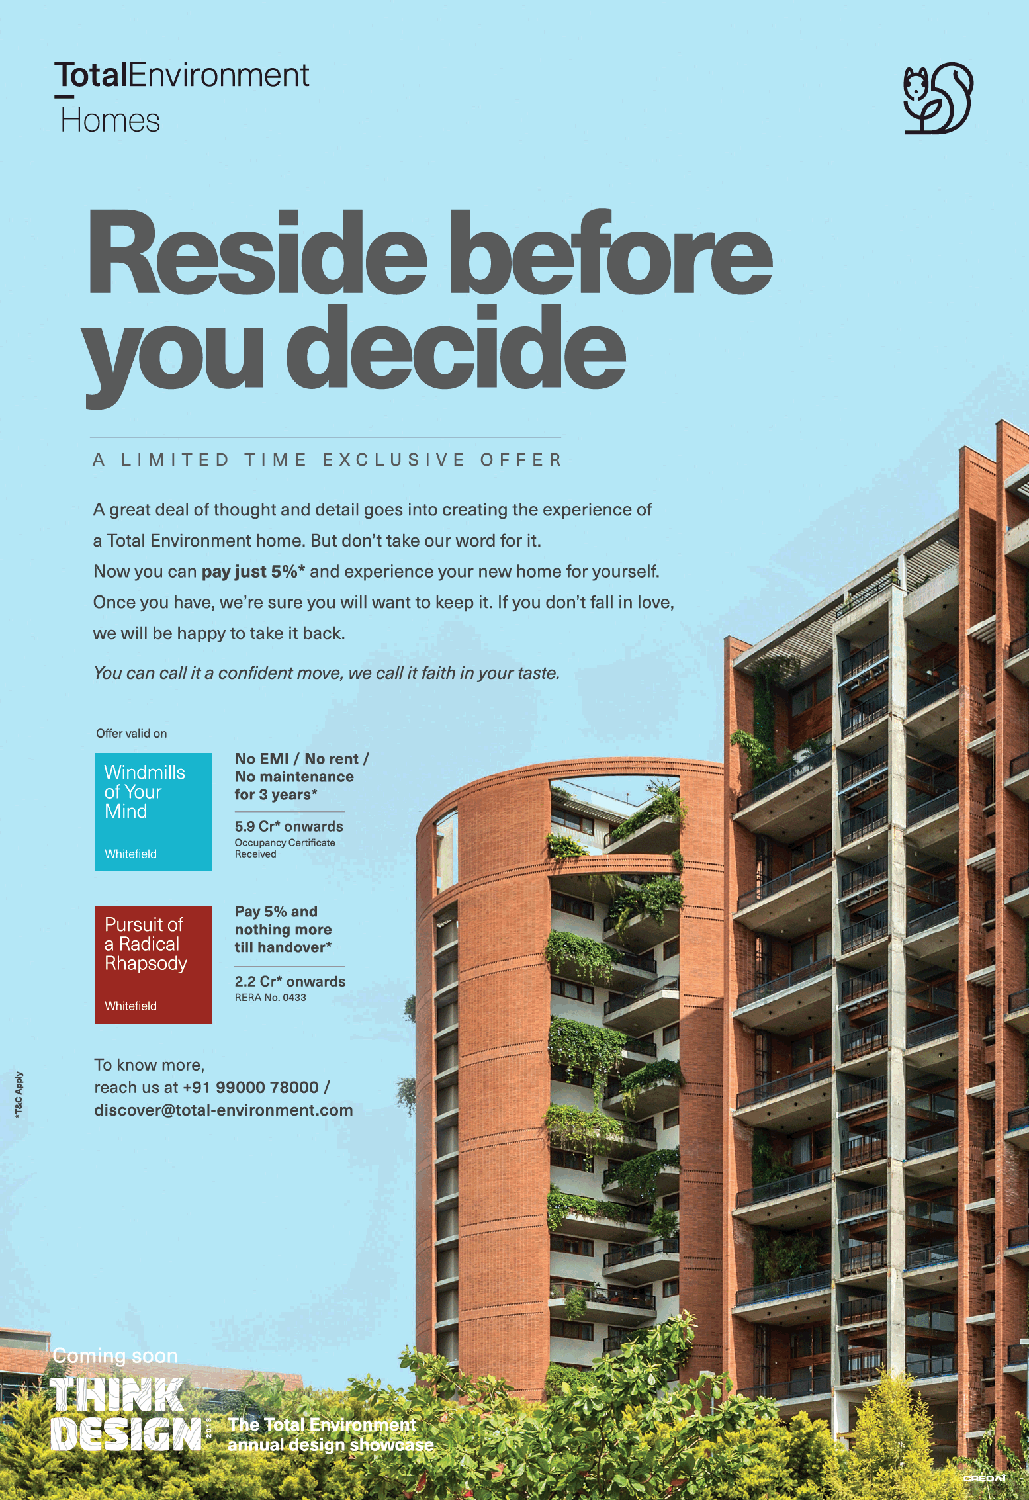 total environment homes reside before you decide ad times of india bangalore 11 11 2018